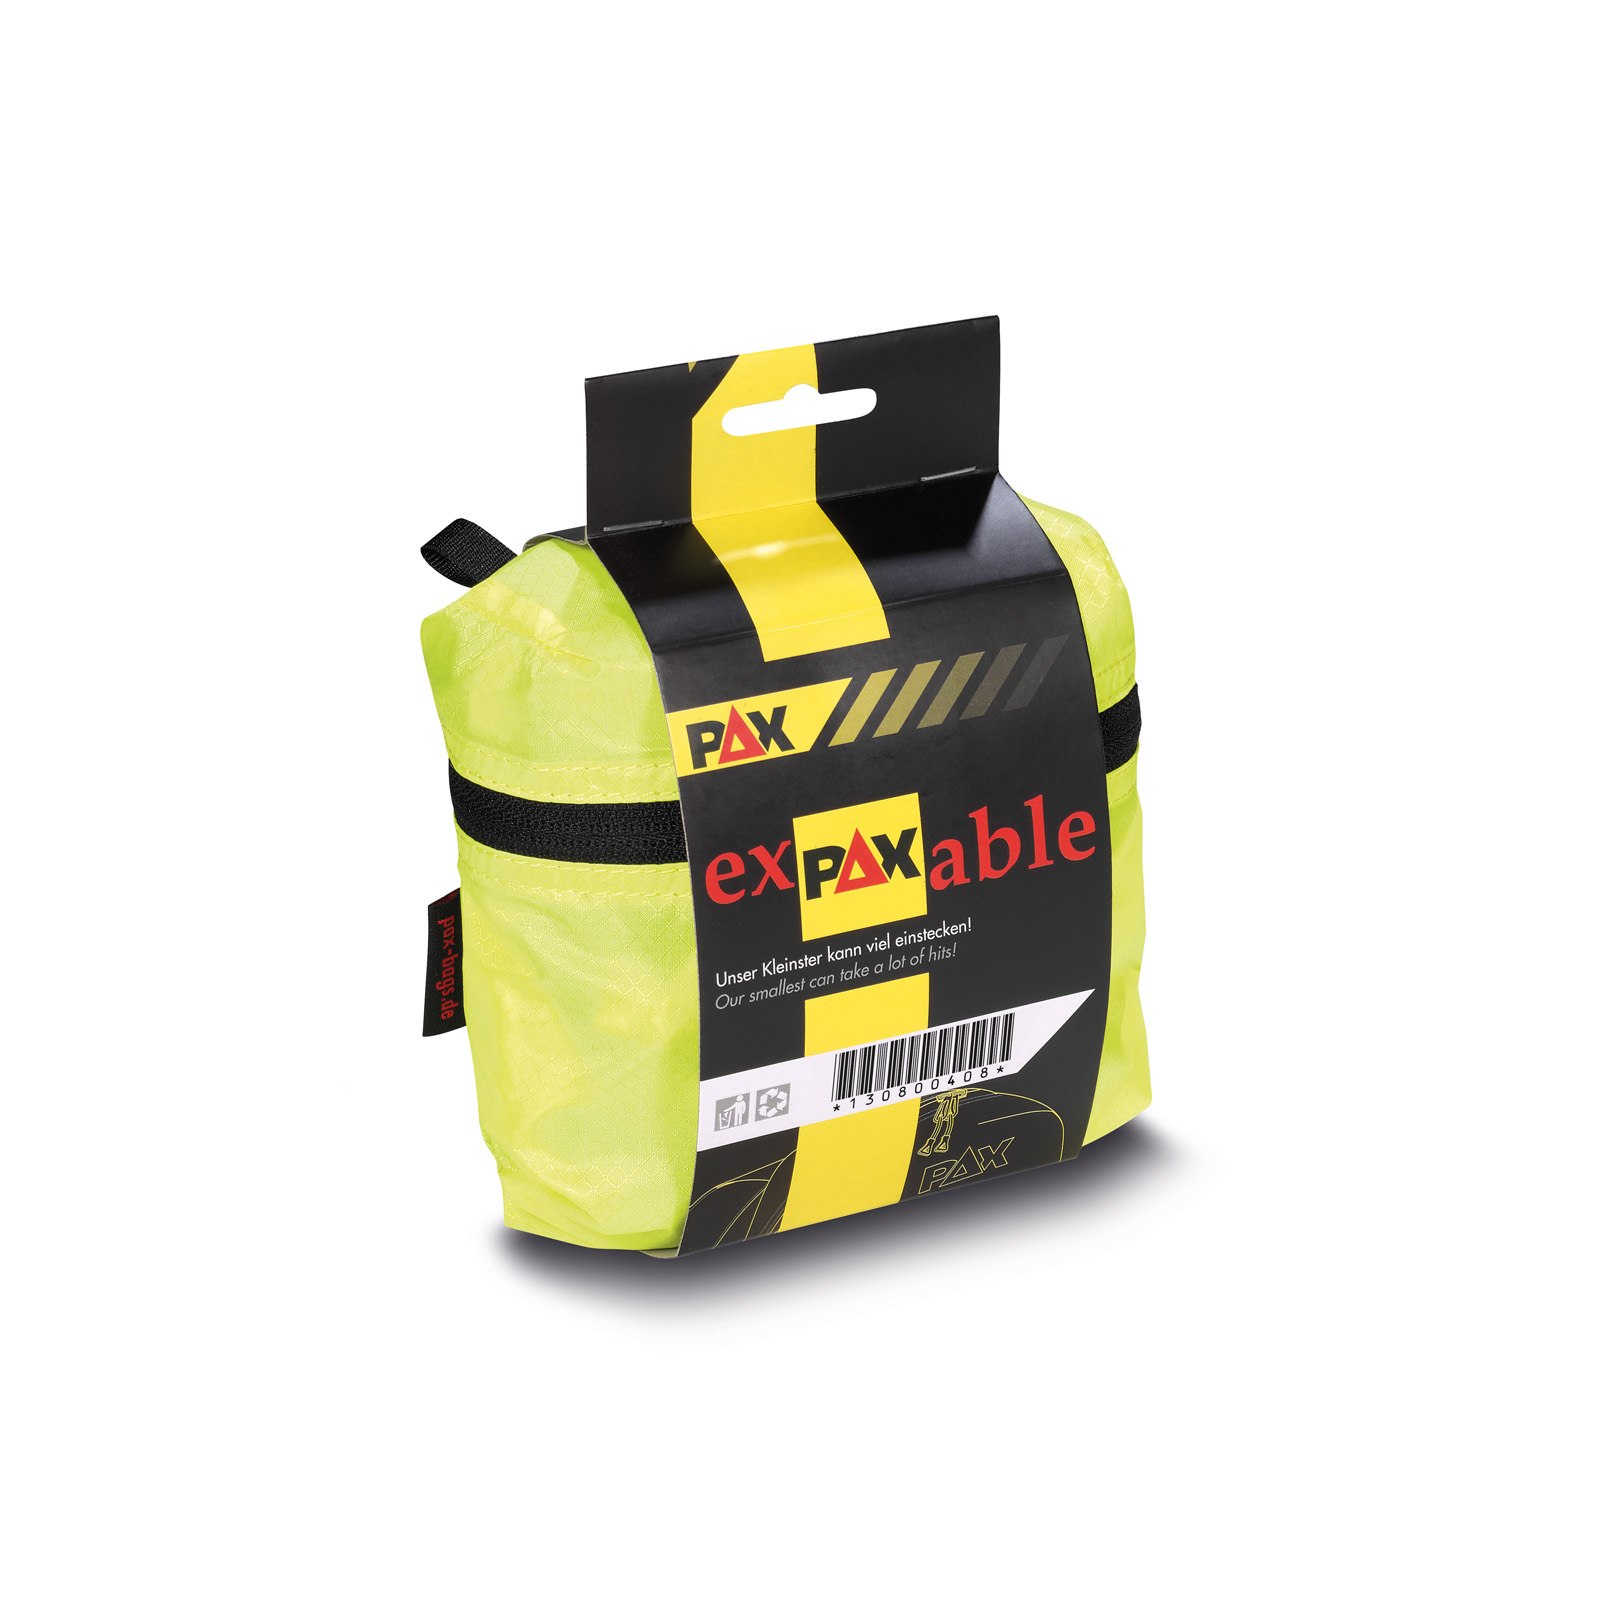 exPAXable Rucksack, PAX-Light in tagesleuchtgelb